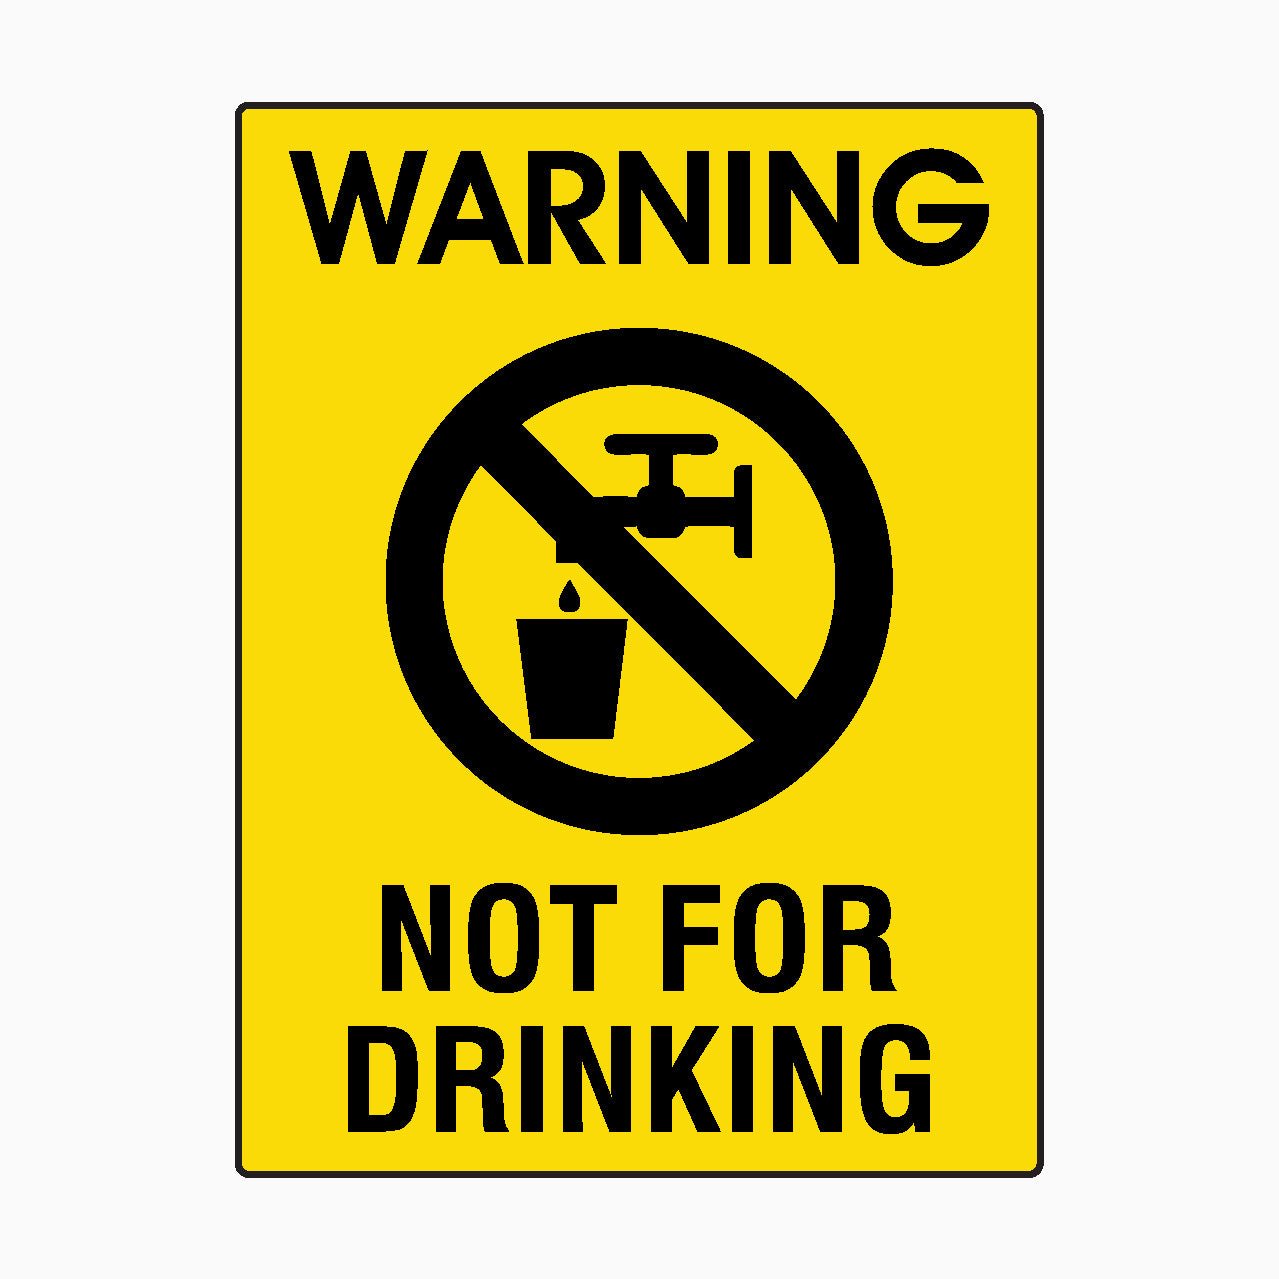 NOT FOR DRINKING SIGN - WARNING SIGN